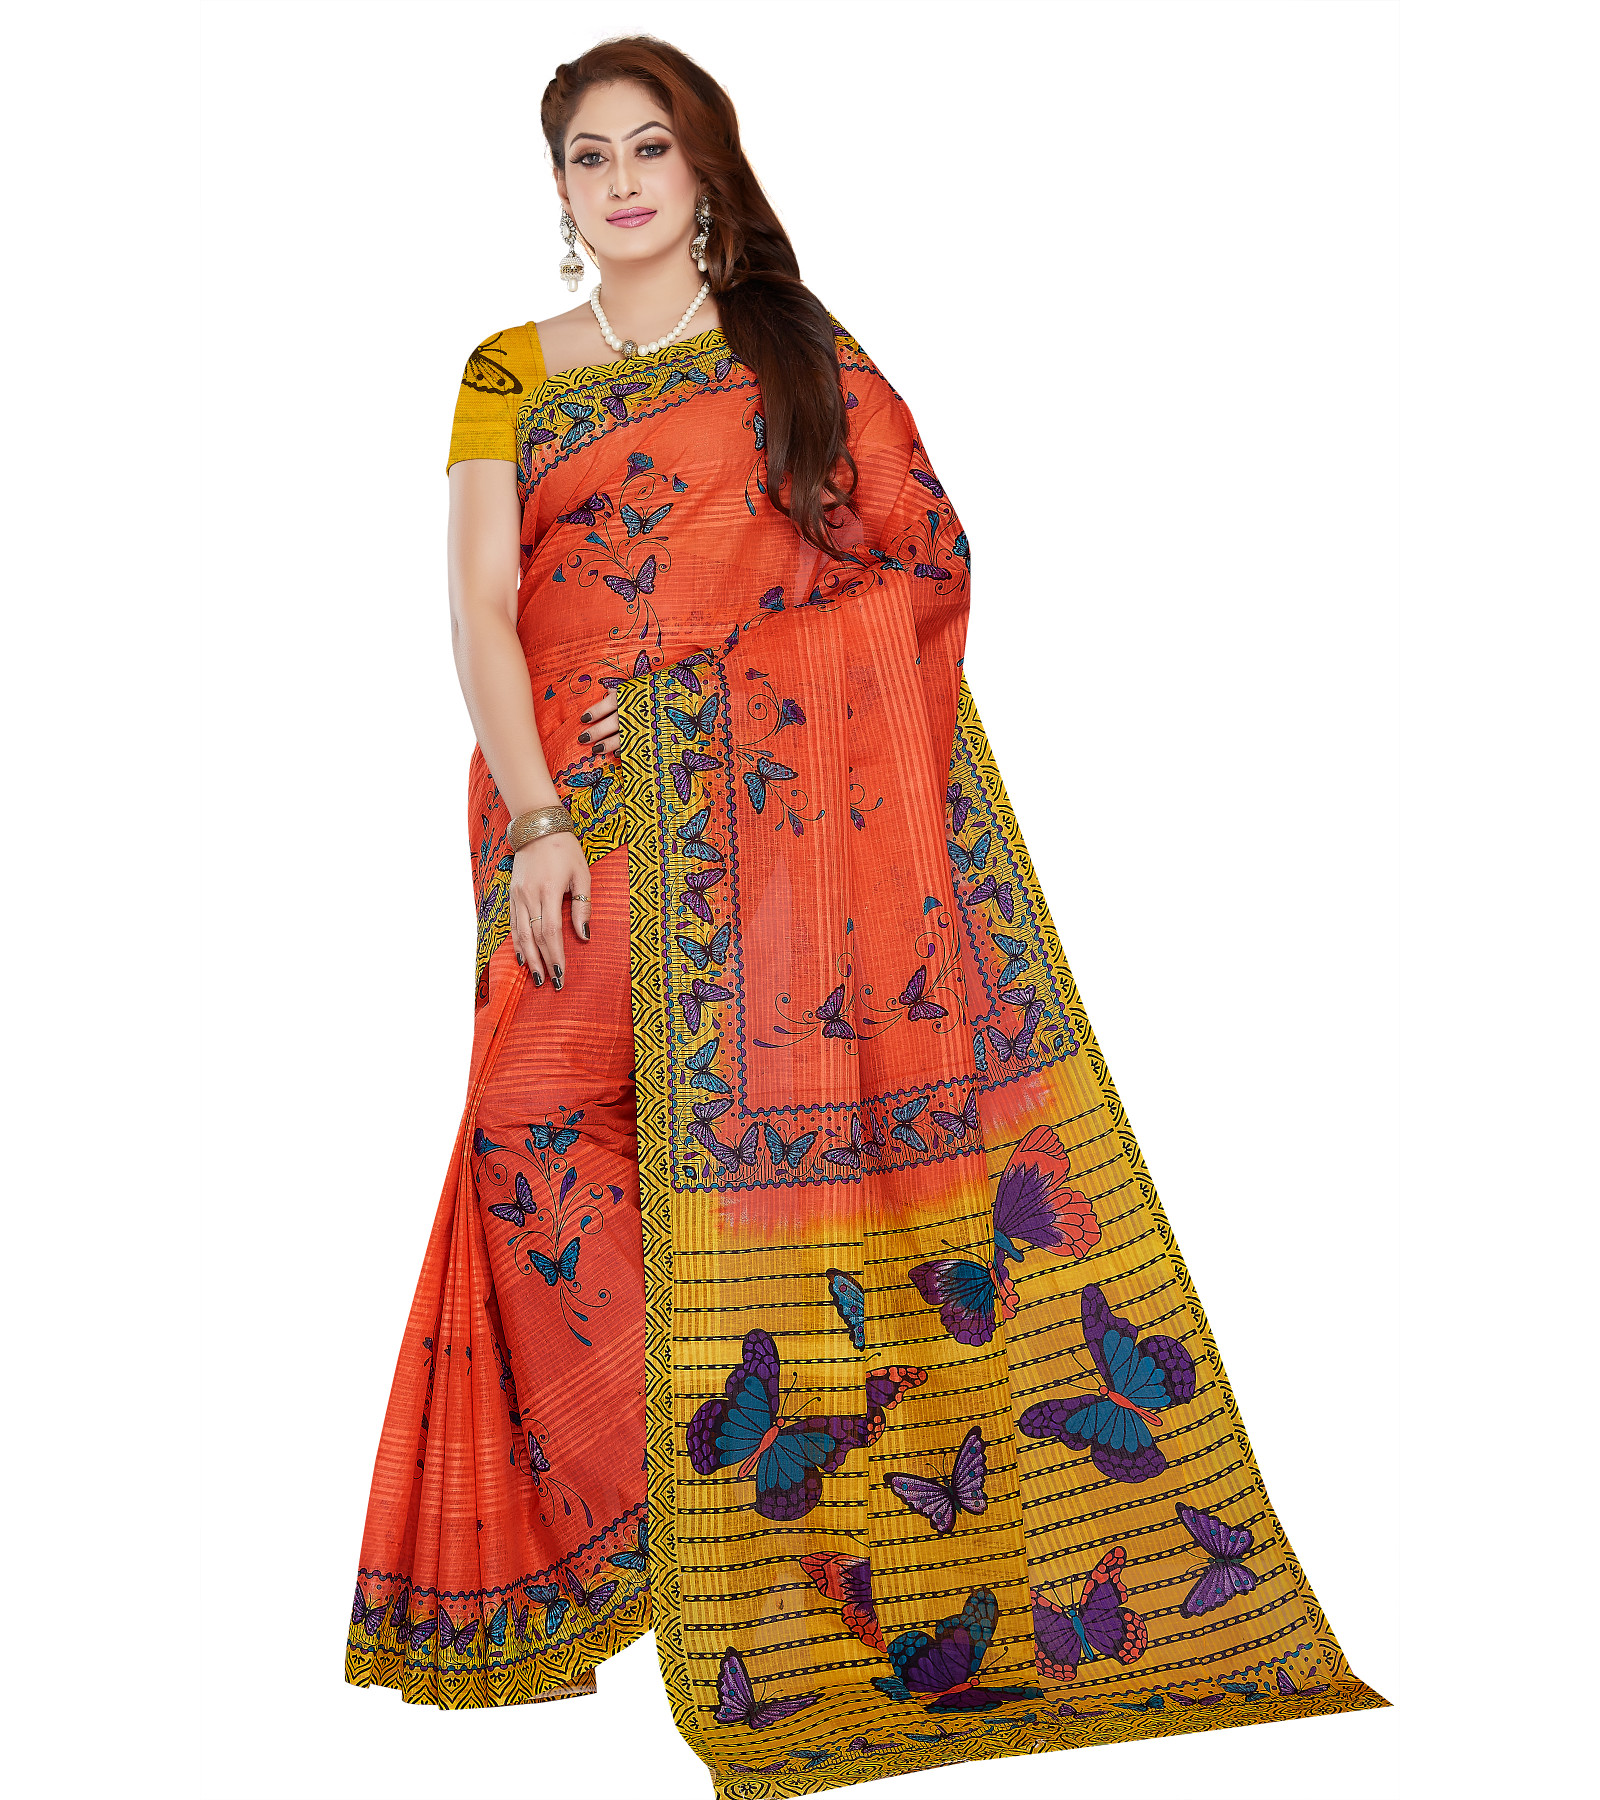  Exclusive Womens Pure Cotton Printed Sarees By Abaranji